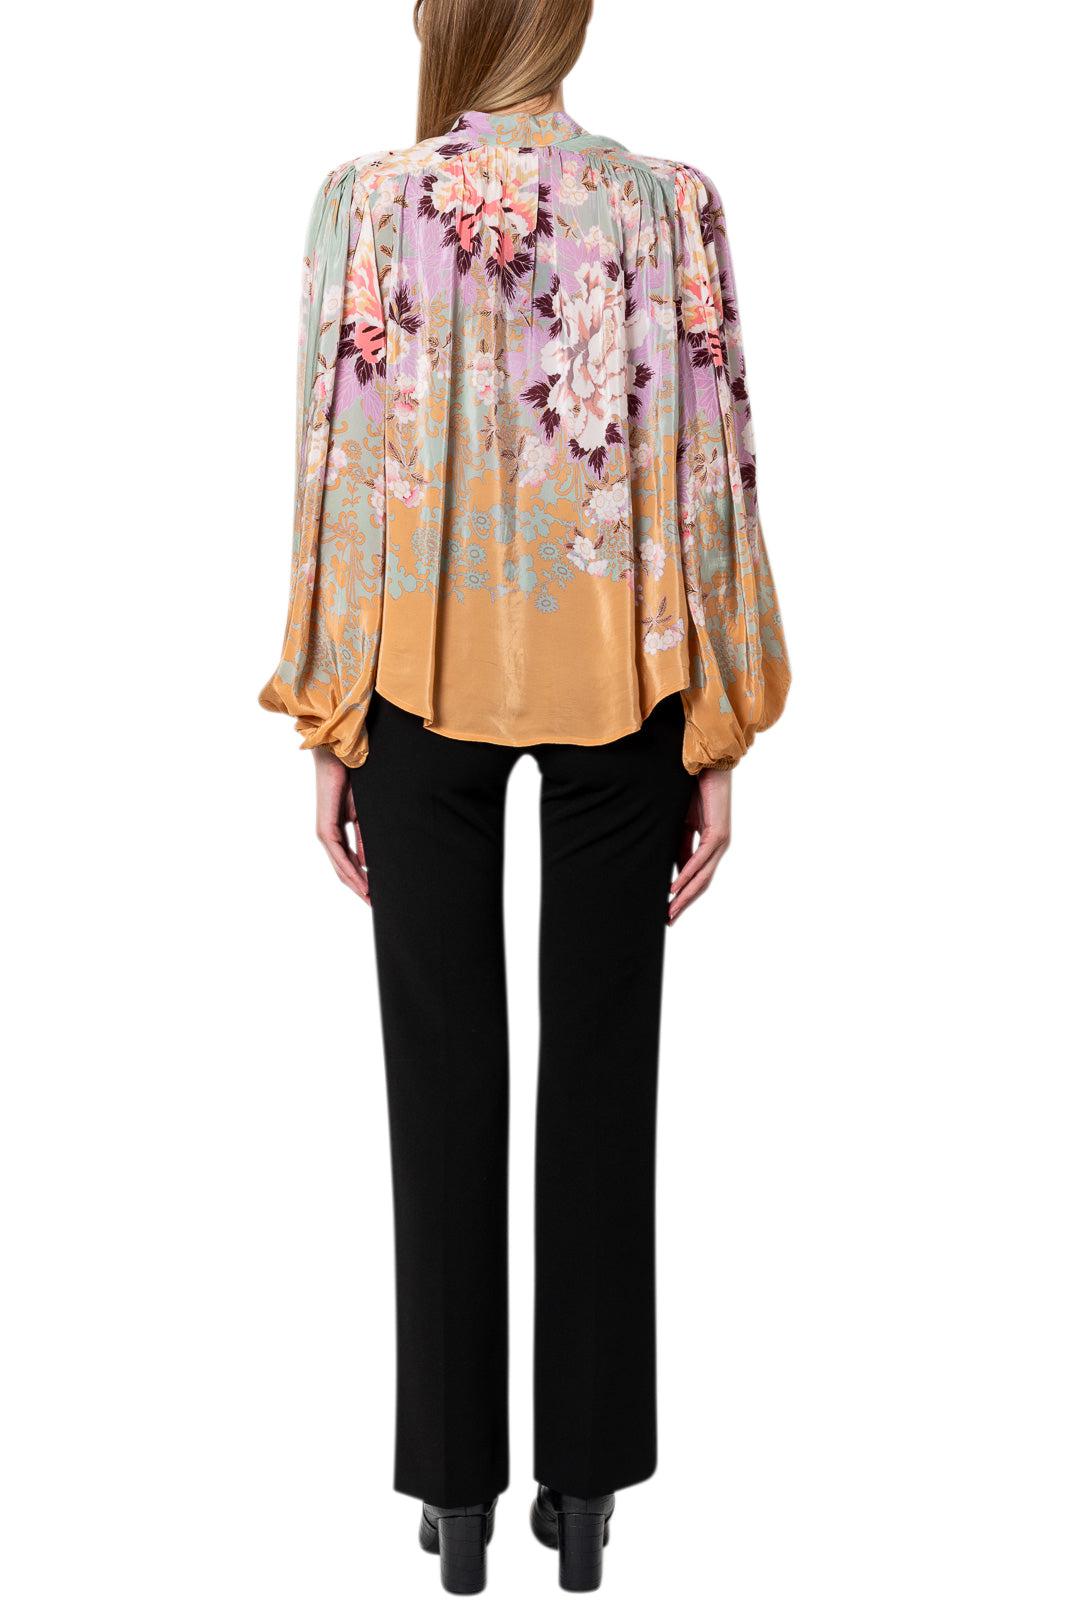 By Timo-Vintage flower print blouse-2340730-dgallerystore